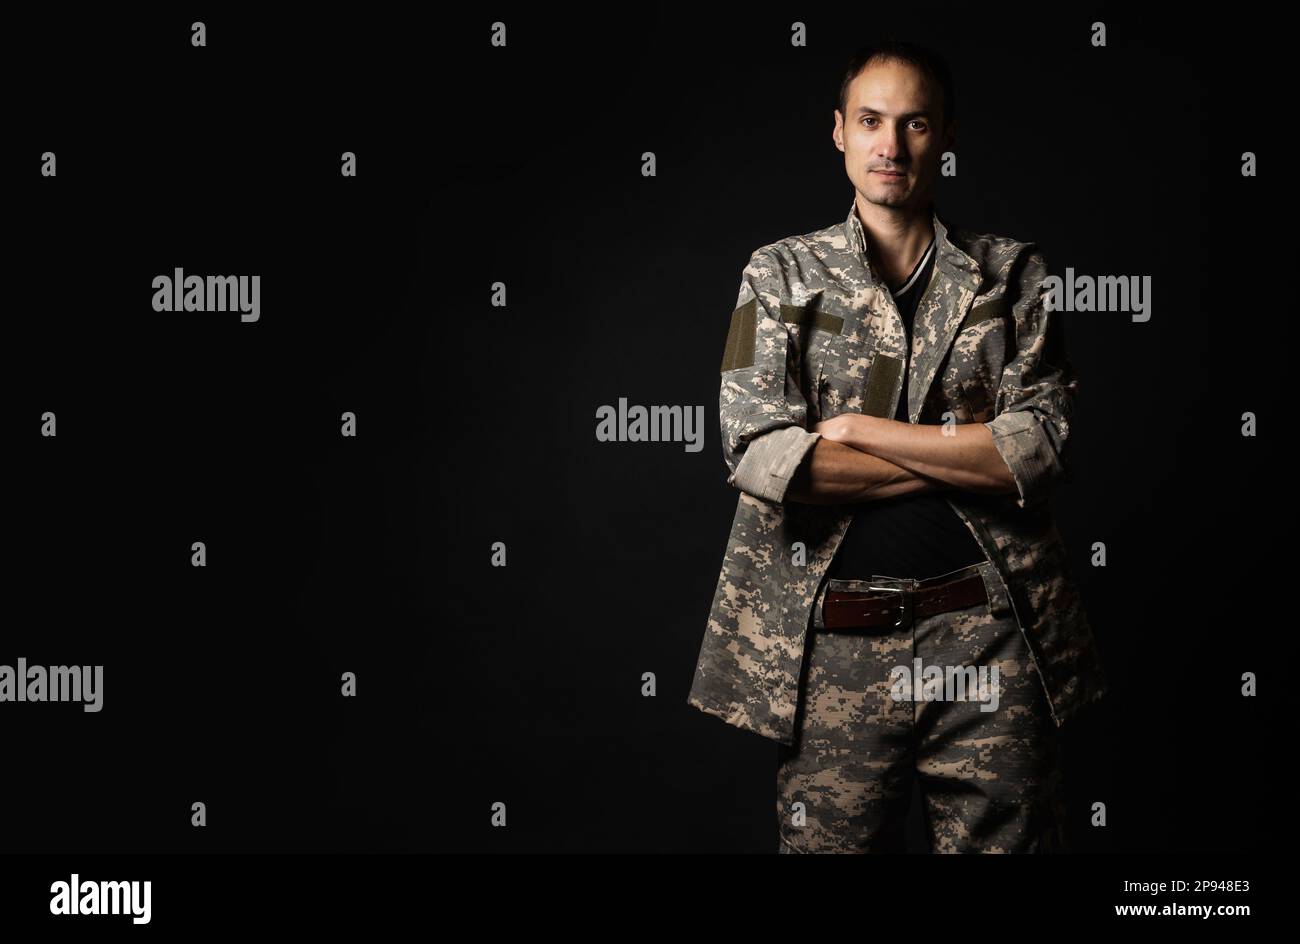 Serious Army Soldier on black background. Stock Photo